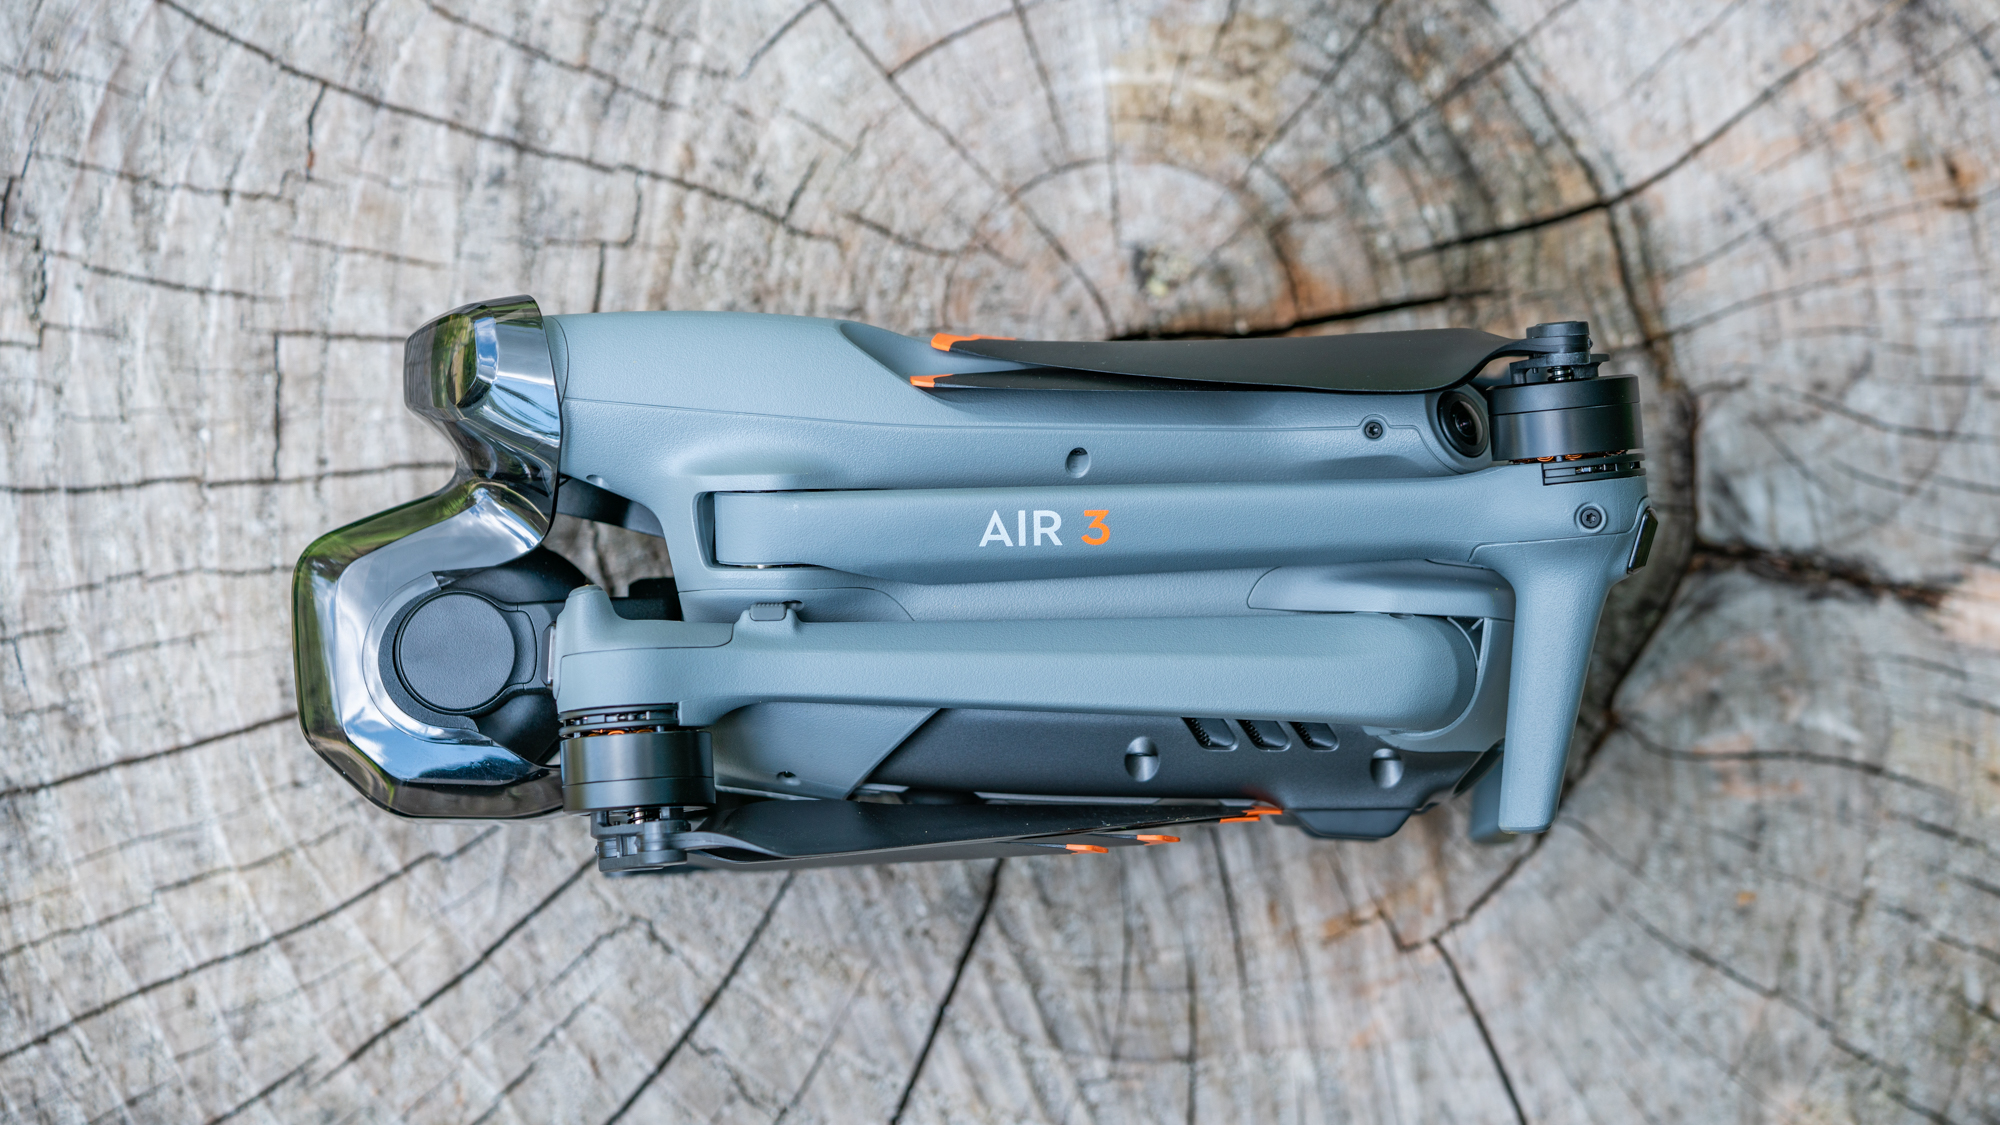 DJI Air 3 drone on a tree stump with arms and propellors folded away